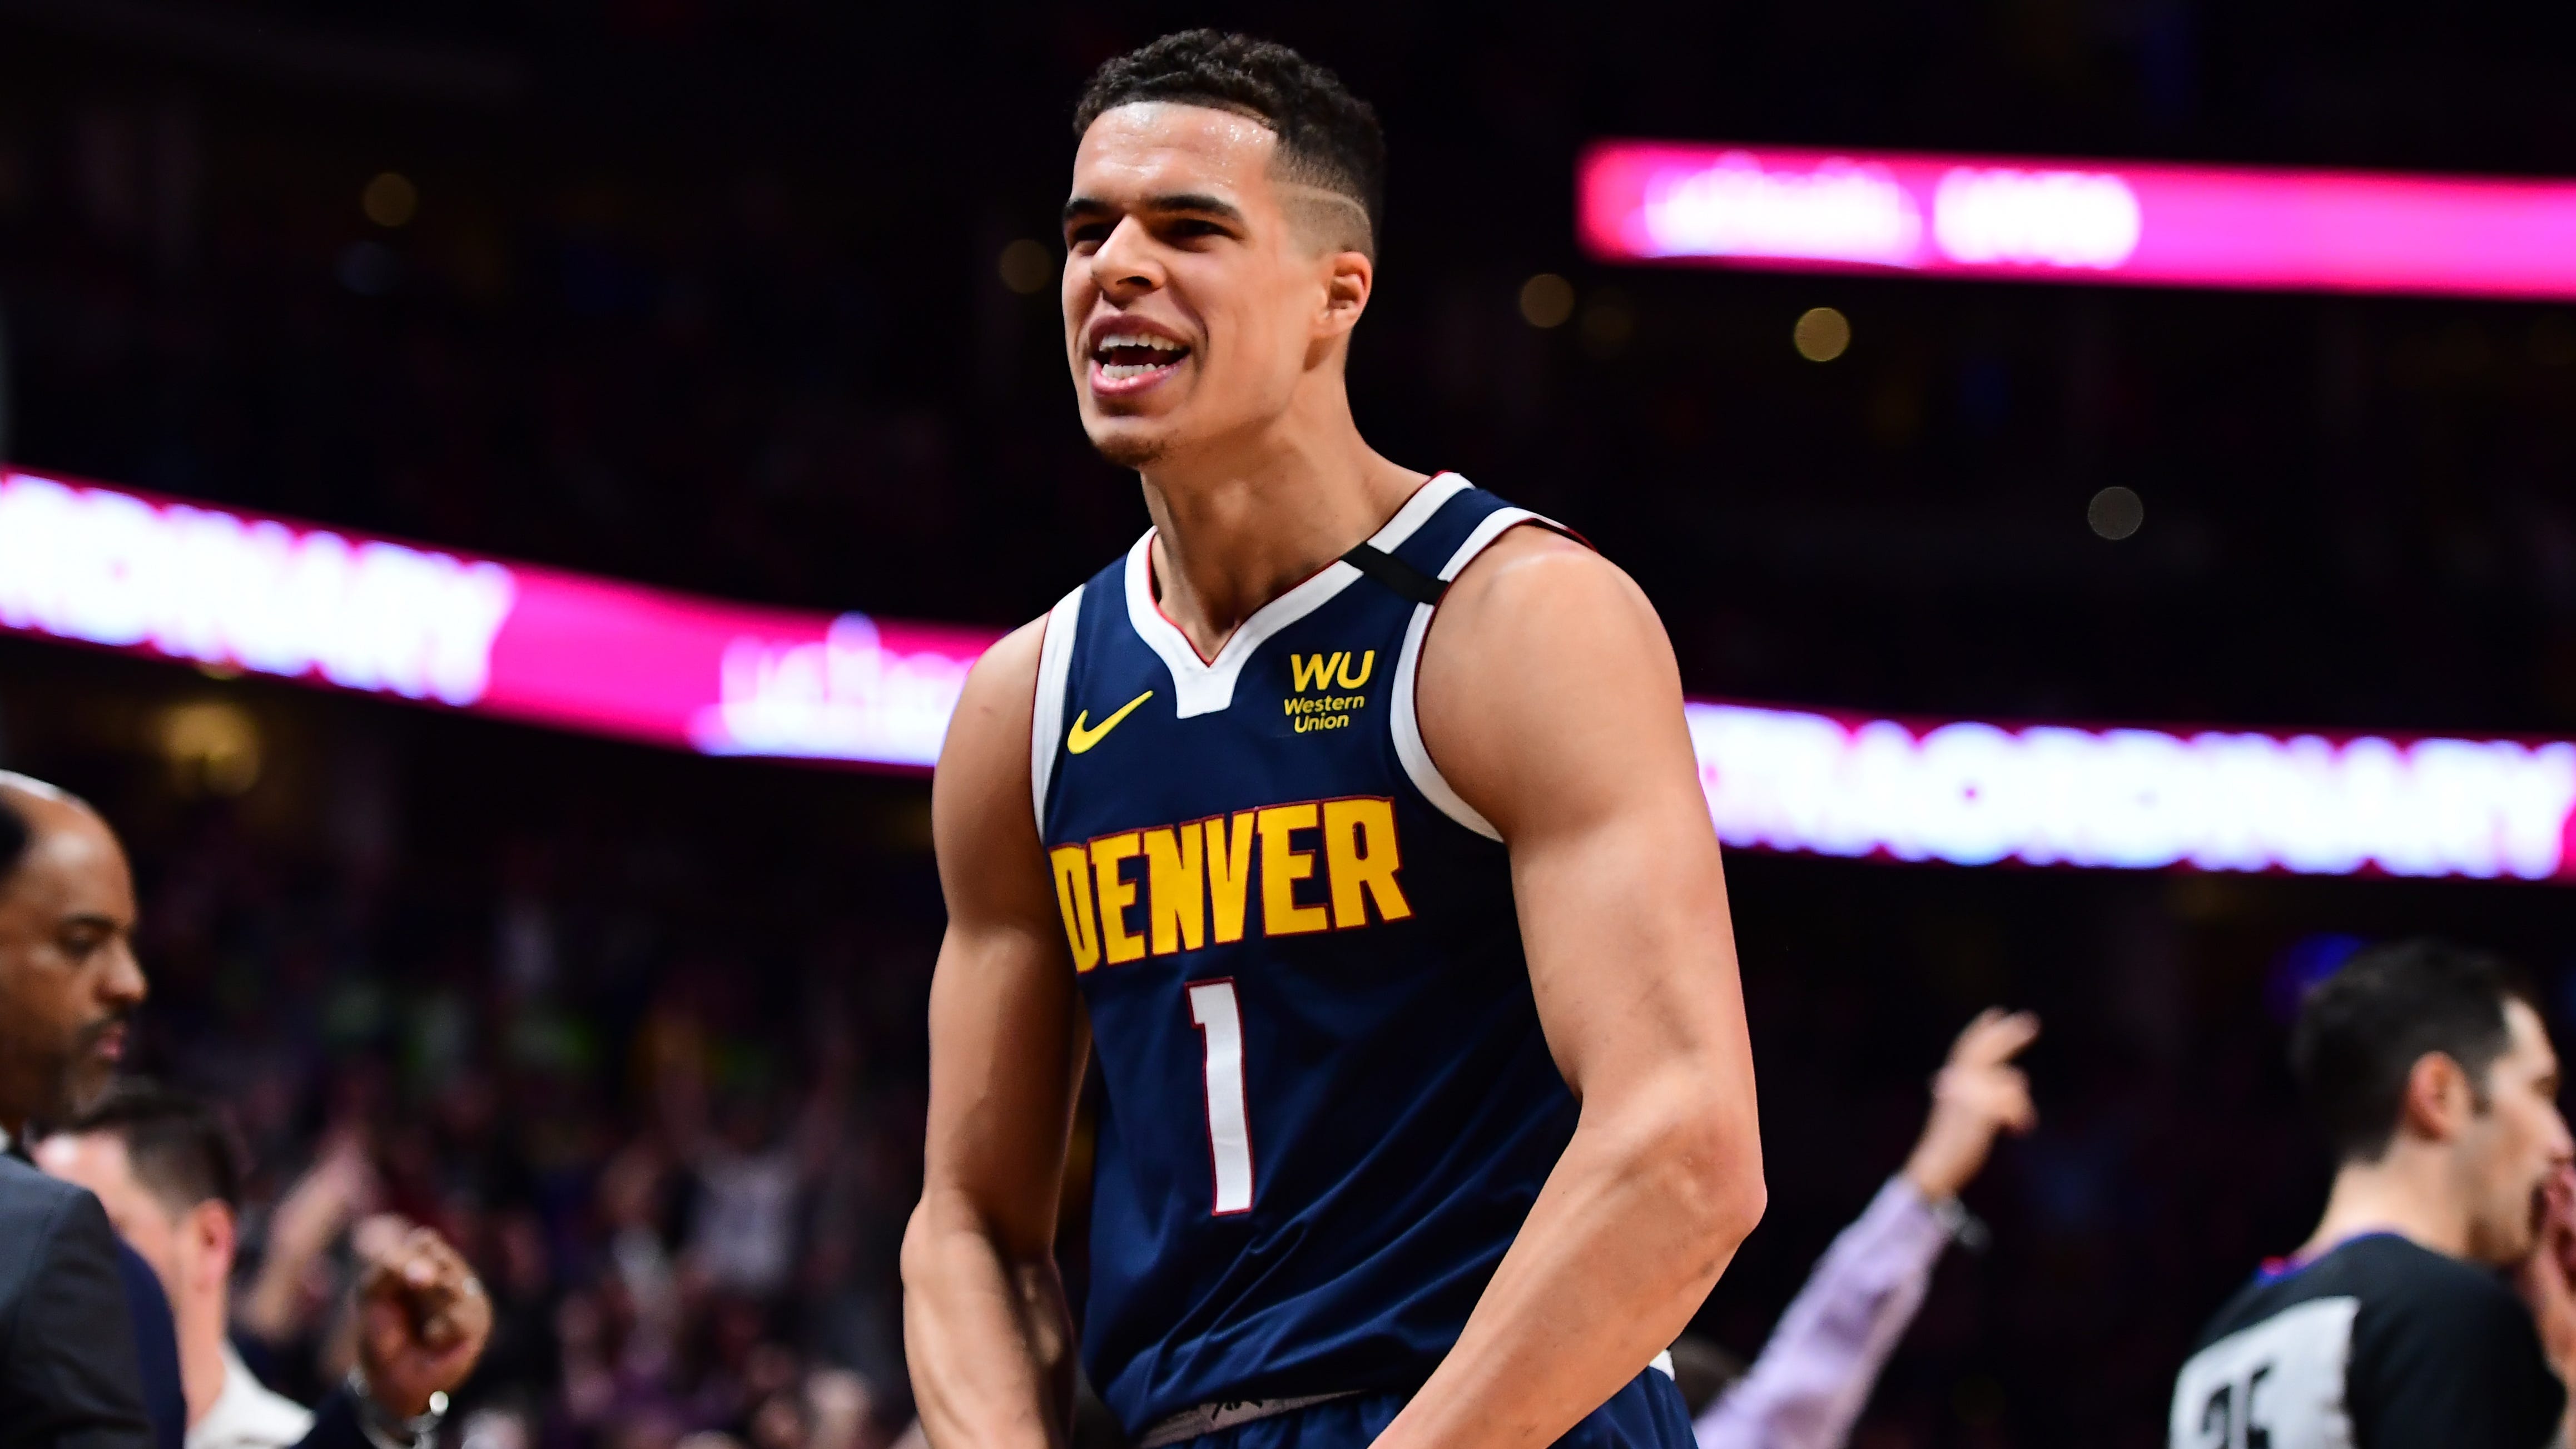 Nuggets talk to Michael Porter Jr. about his coronavirus 'population control' comments